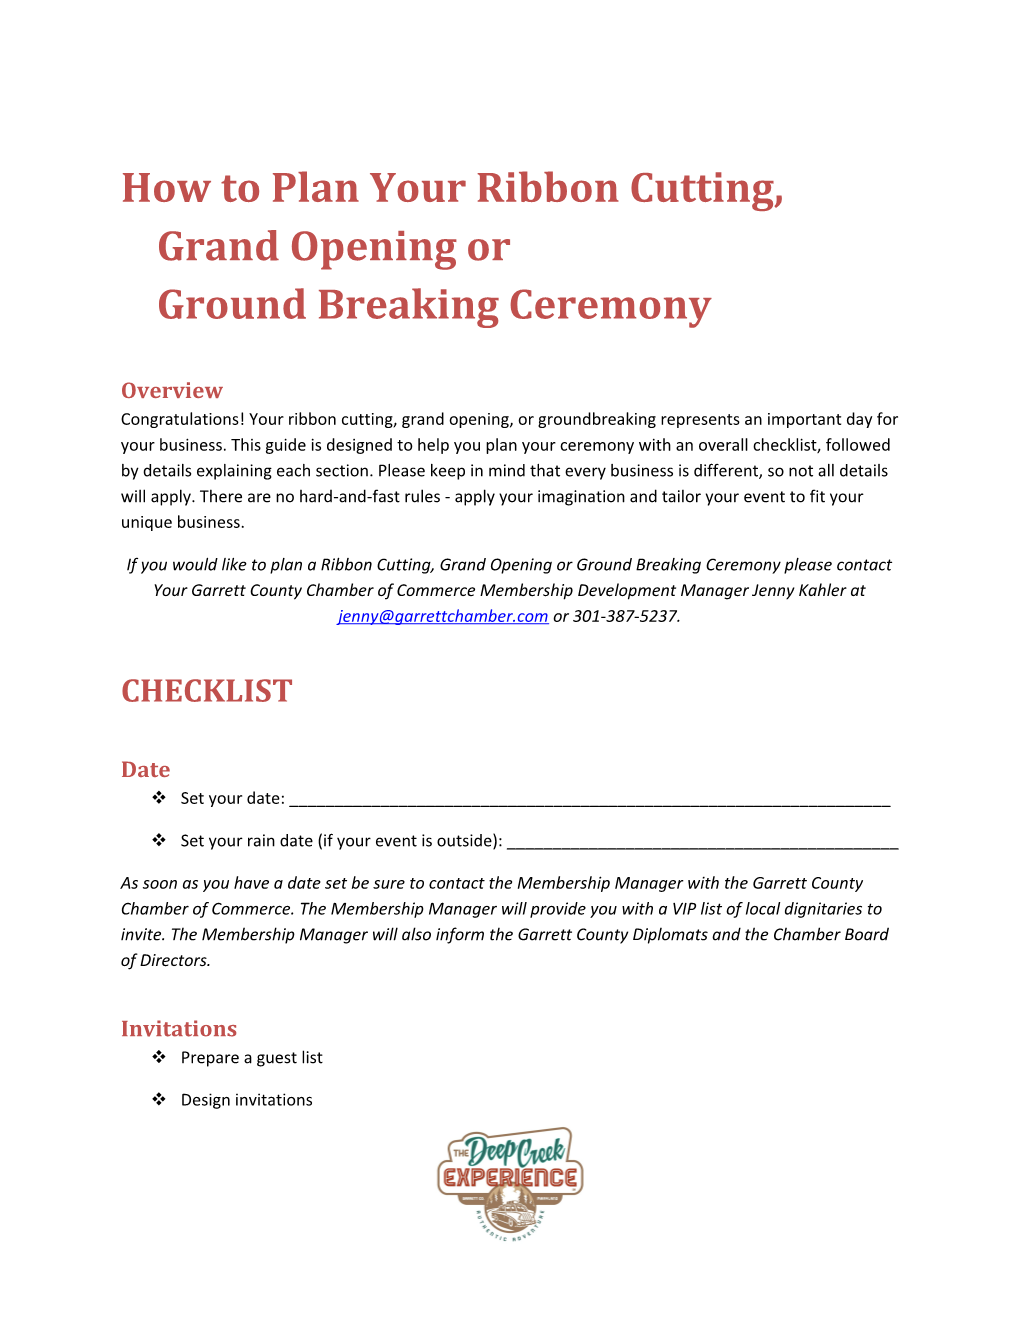 How to Plan Your Ribbon Cutting, Grand Opening Or Ground Breaking Ceremony